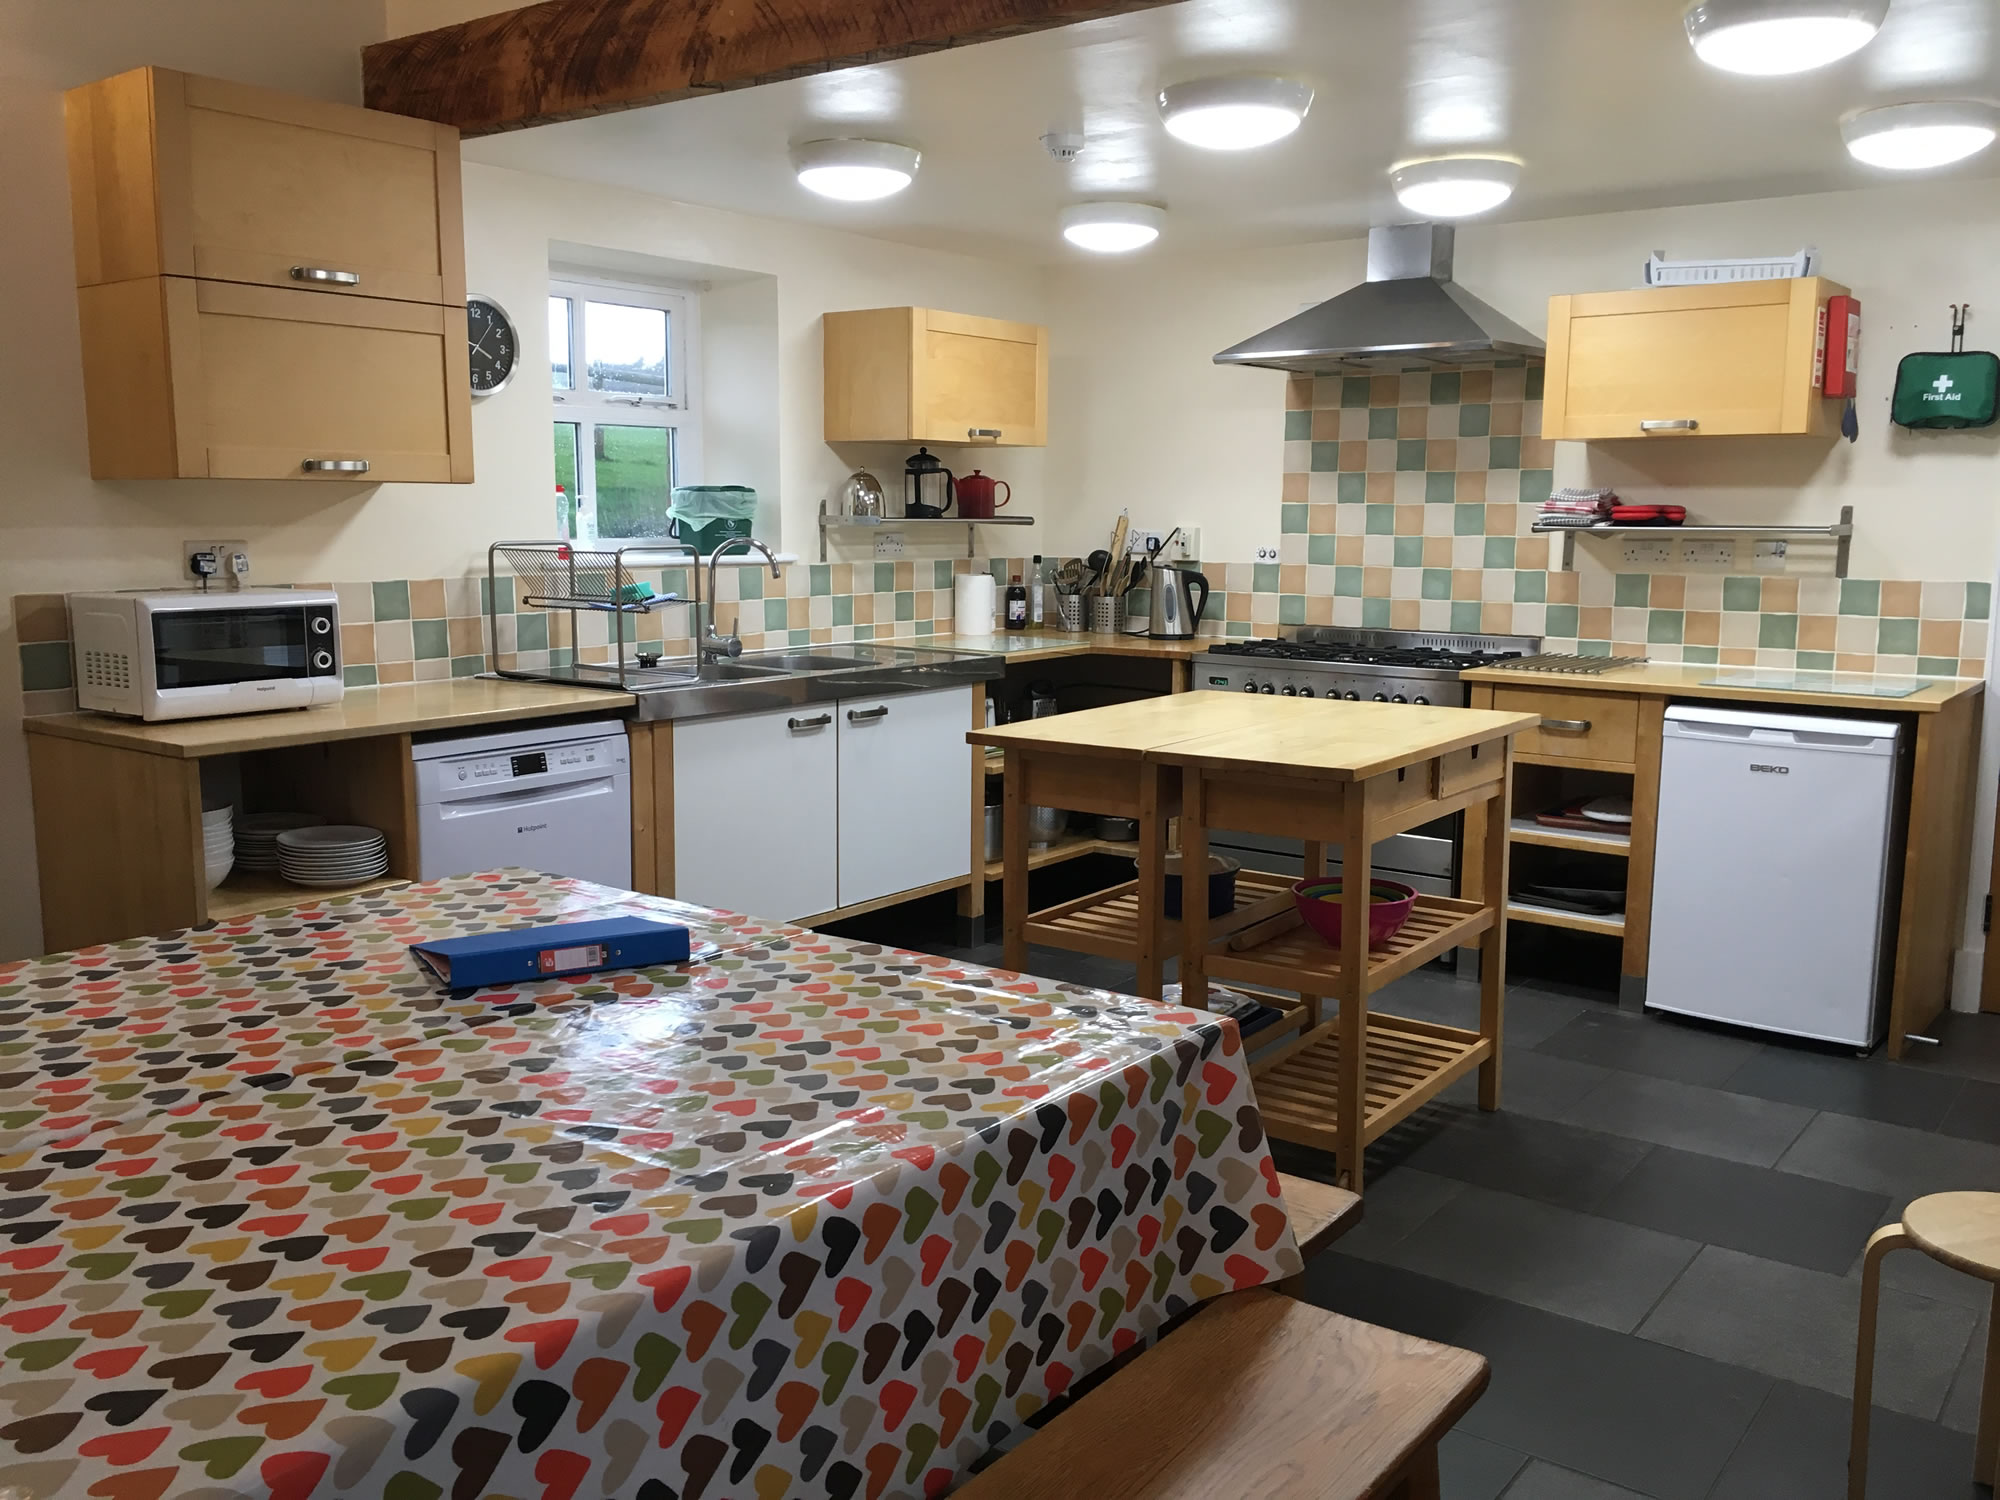 Hardingsdown Bunkhouse and The Chaffhouse The perfect base for all holidays in the Gower Peninsula.